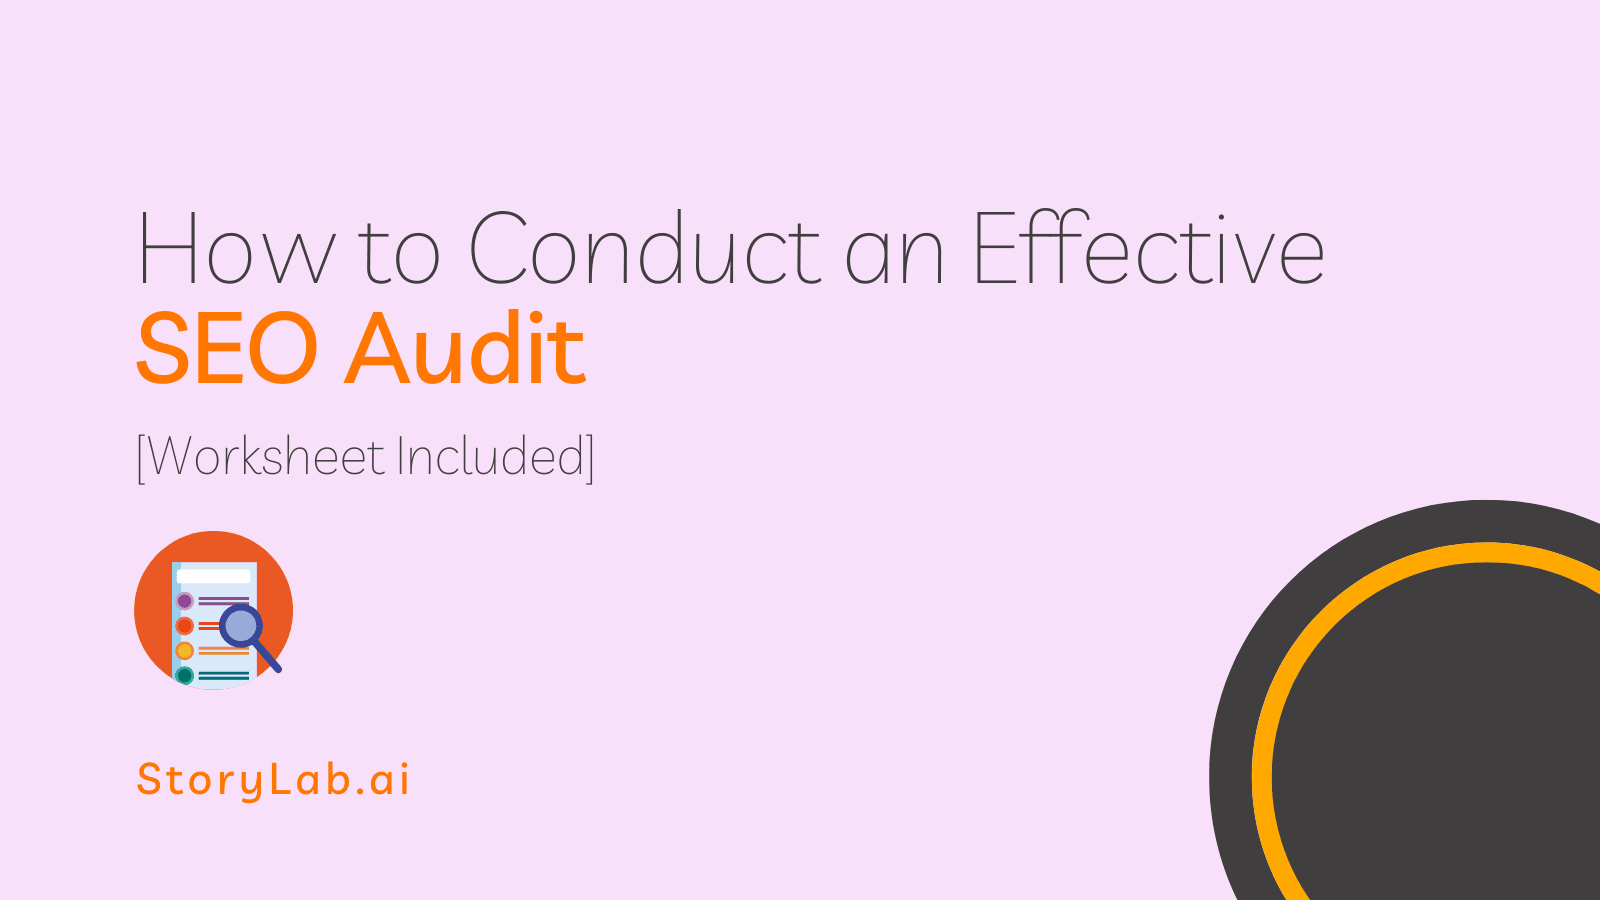 How to Conduct an Effective SEO Audit